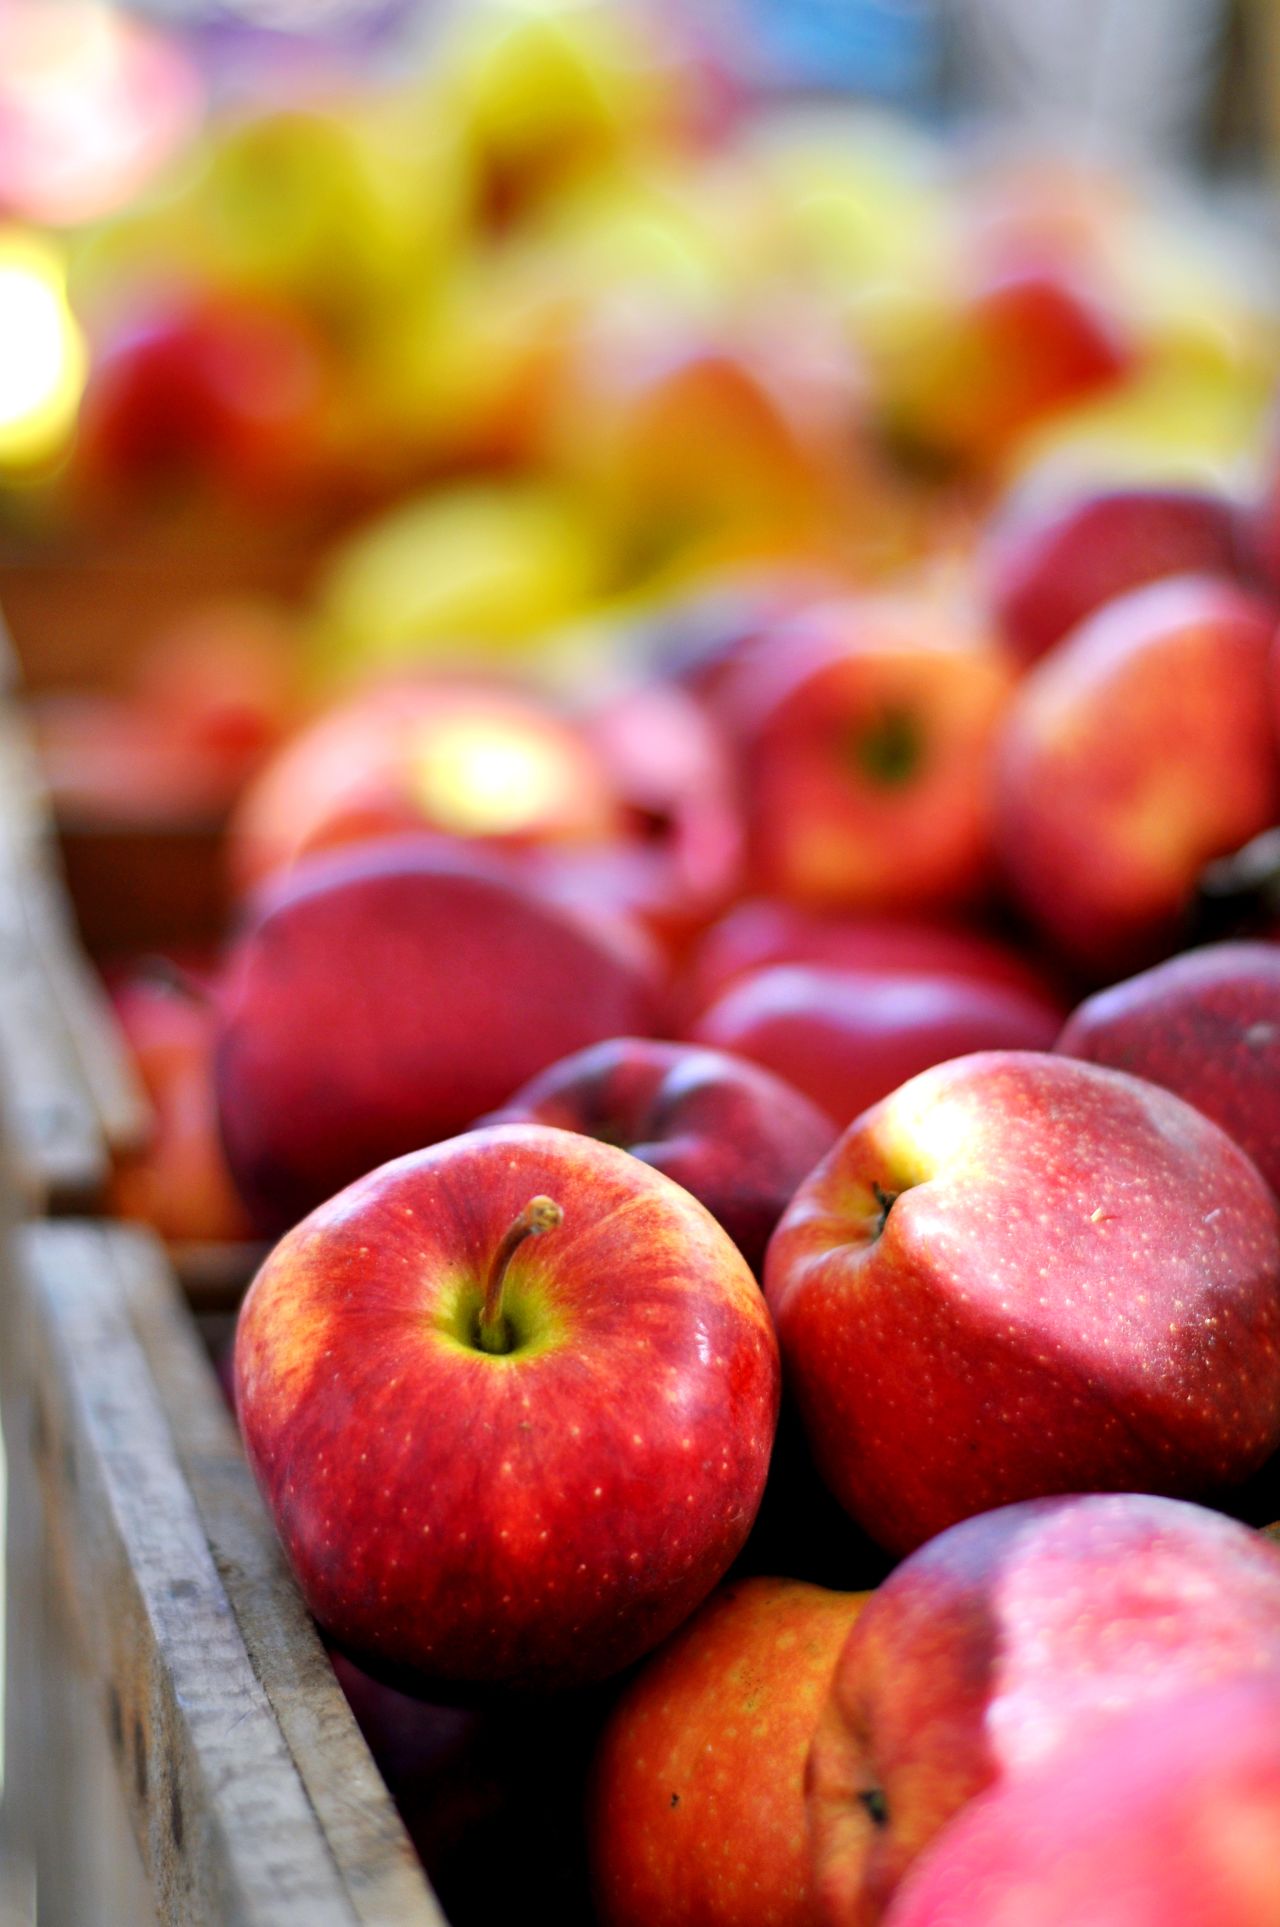 The old adage goes "an apple a day keeps the doctor away" — and with <a href="https://www.ncbi.nlm.nih.gov/pmc/articles/PMC442131/#:~:text=In vitro and animal studies,reducing risk of chronic disease." target="_blank" target="_blank">studies</a> showing a link between apples and lowered risk of chronic disease, it seems there might be some truth to it. A great source of antioxidants, fiber, vitamin C and potassium, apples have also been <a href="https://link.springer.com/article/10.1007/s00394-012-0489-z" target="_blank" target="_blank">shown</a> to reduce "bad" LDL cholesterols.